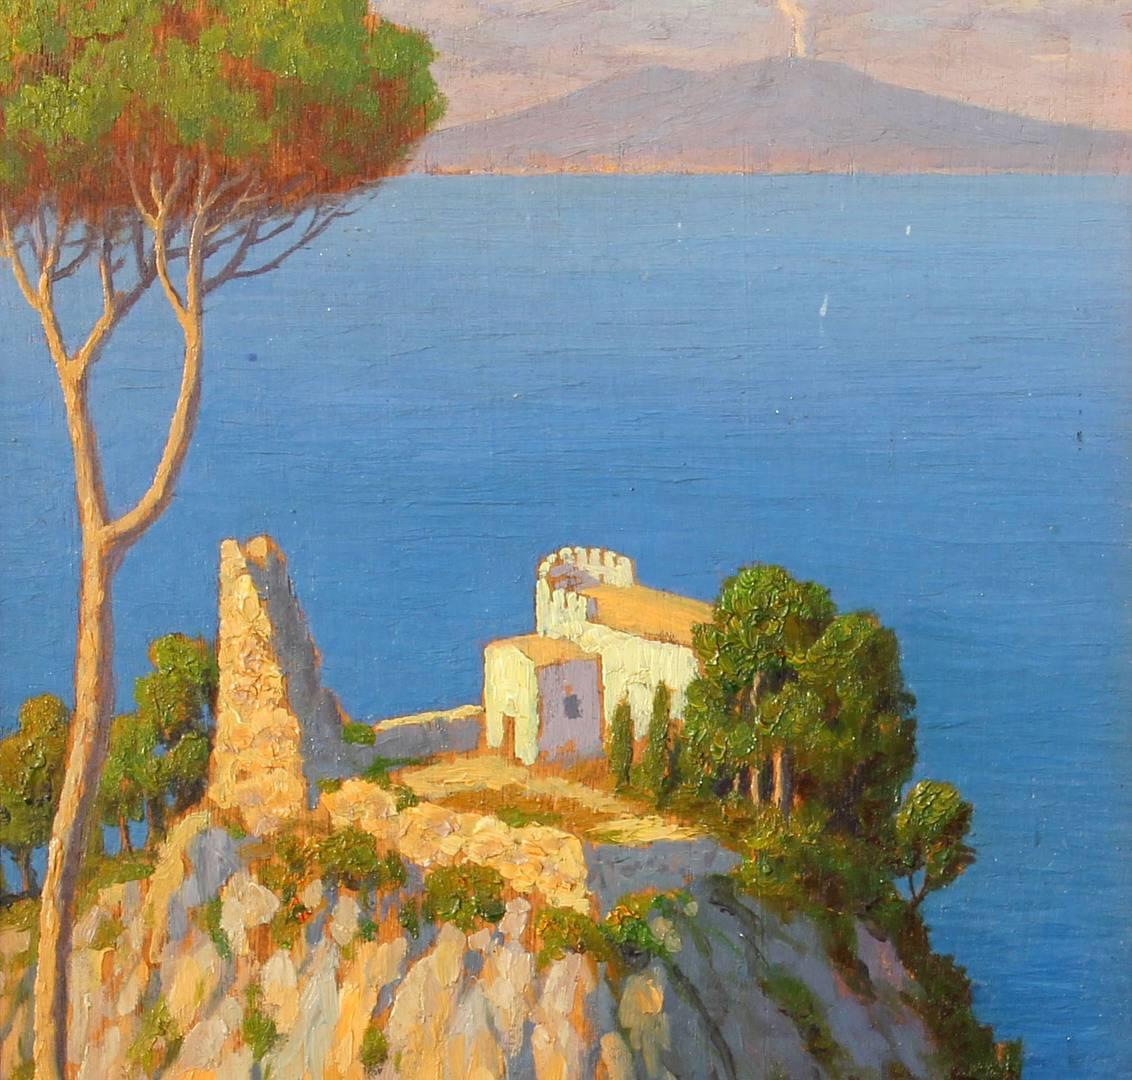 Oil painting sunlit Mediterranean view of the Bay of Naples and Mt Vesuvius. Oil on board by Willem Welters (Dutch 1881-1972).